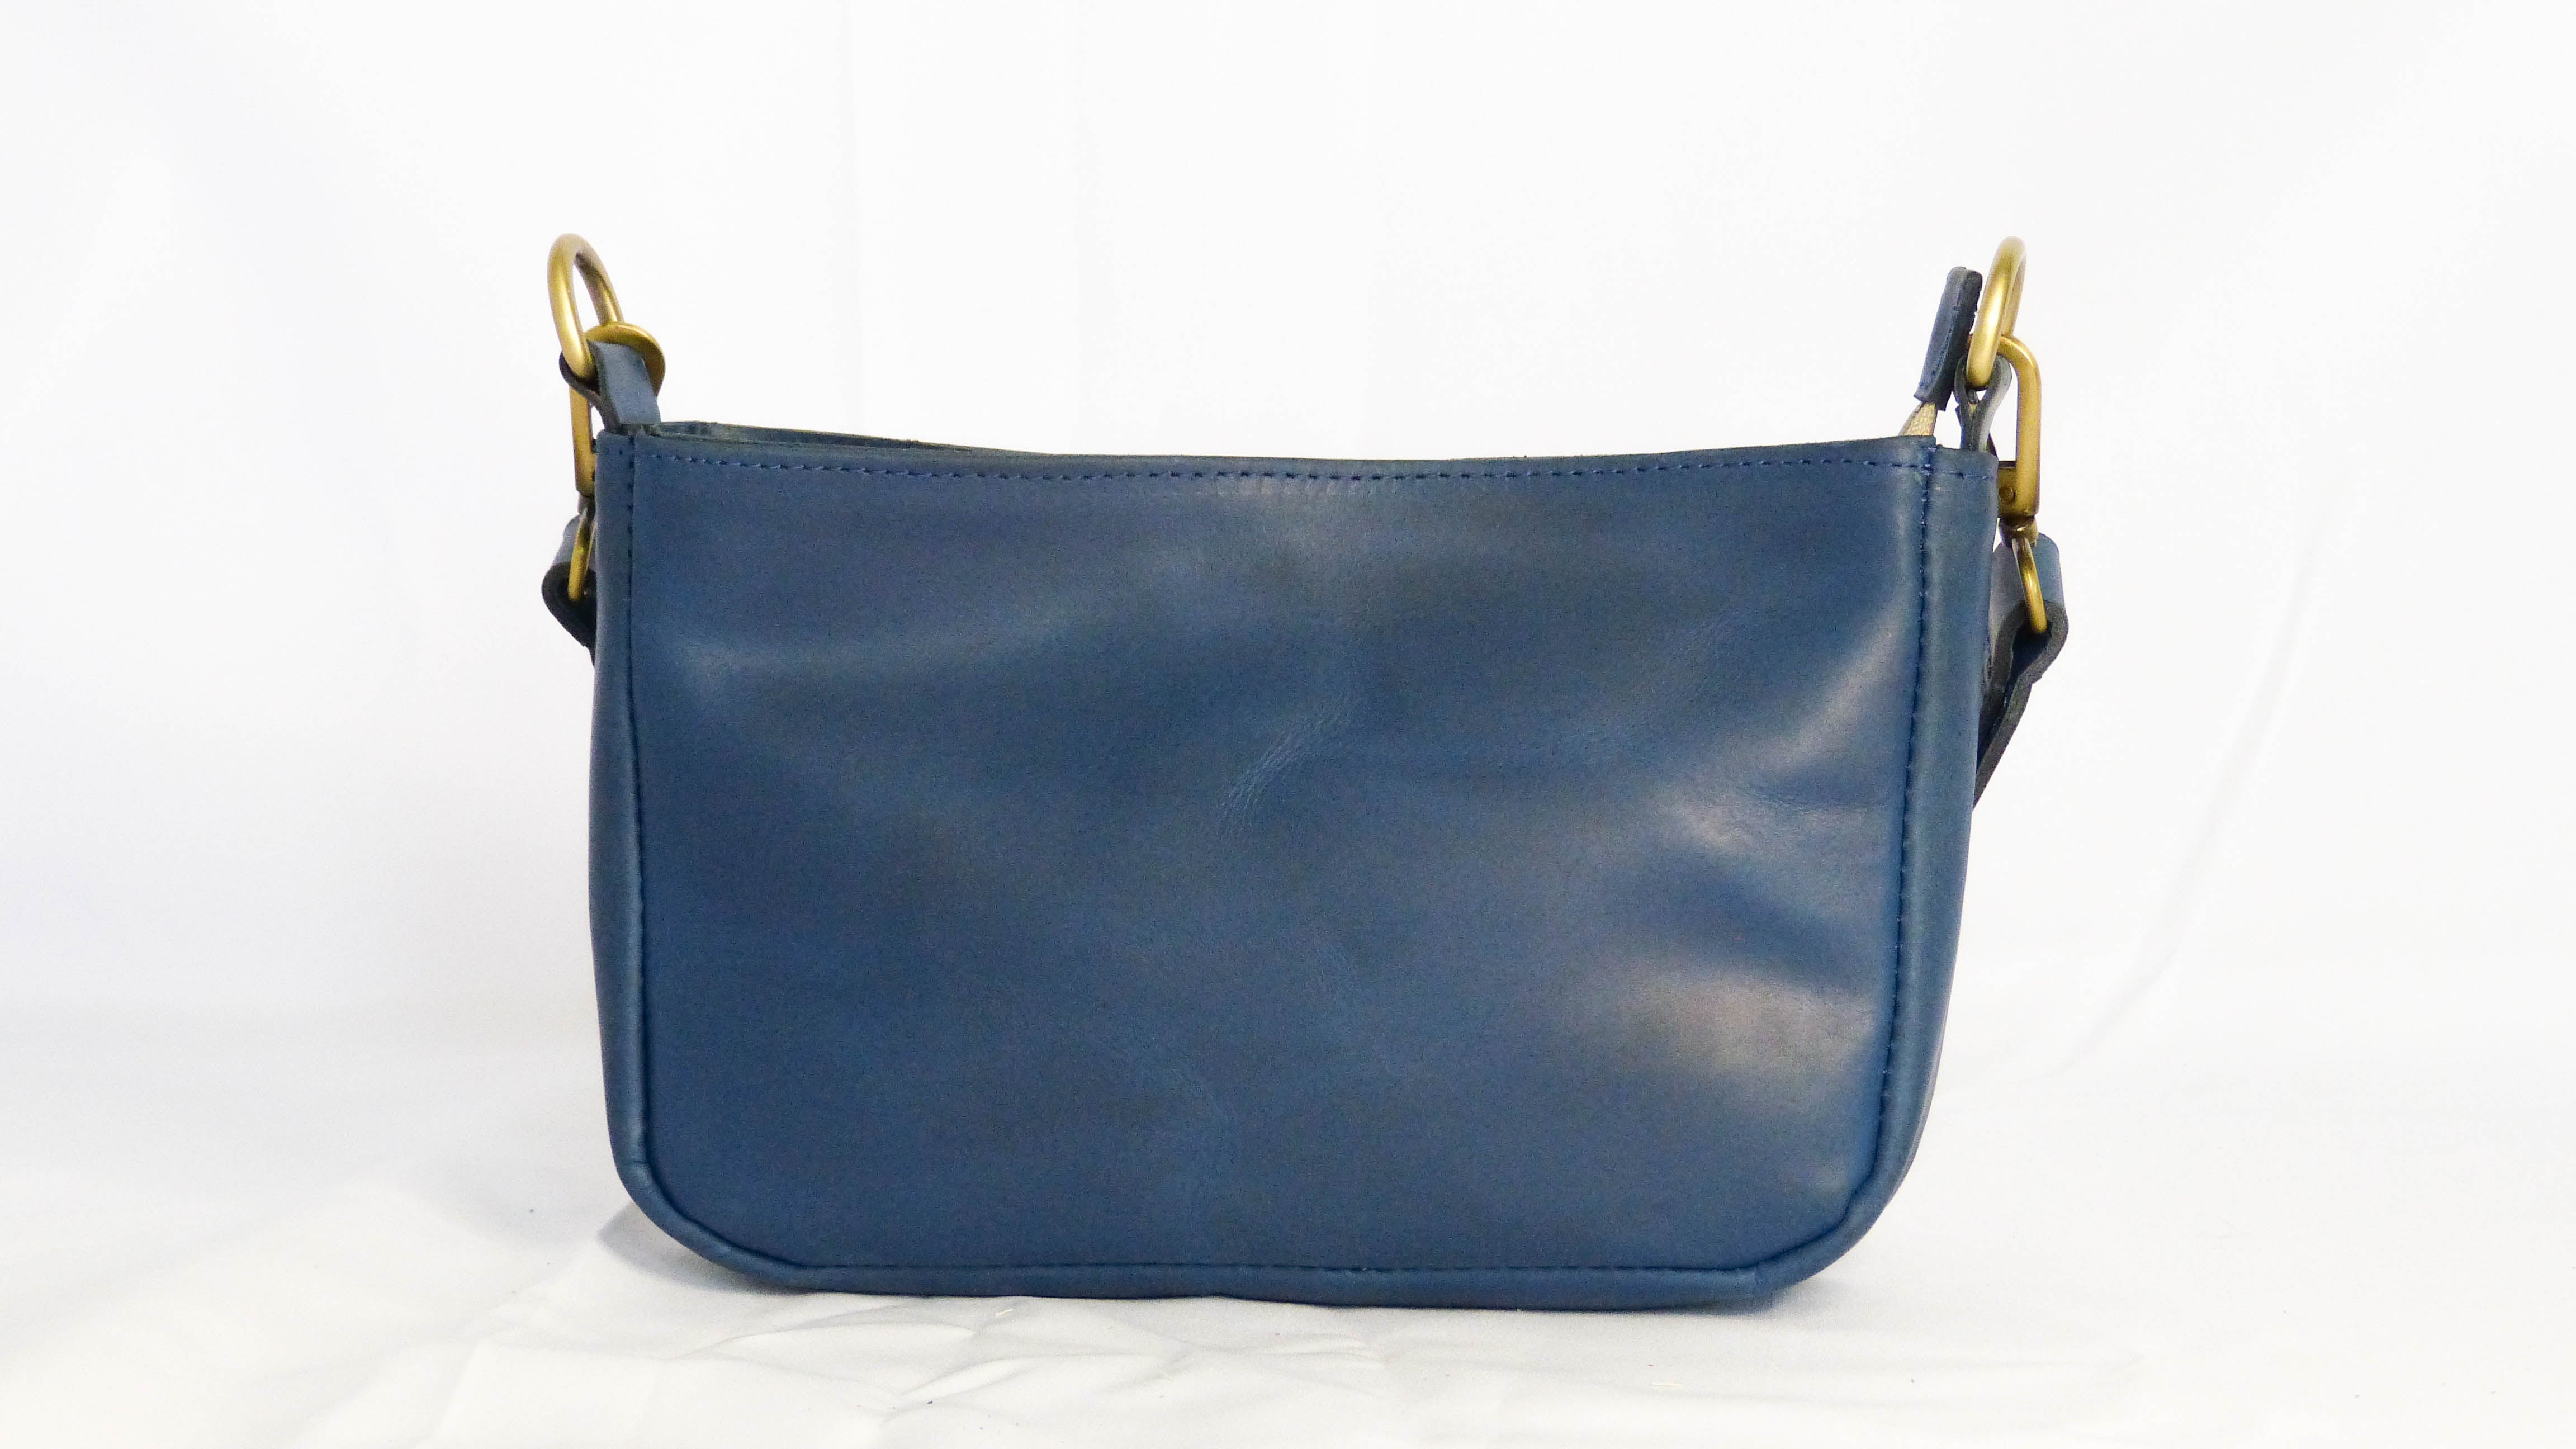 Handcrafted Jessica Leather Purse in Cornflower Blue with gold handles. Features zippered top, inside pocket, and removable shoulder strap. Ethically made by Ethiopian artisans.